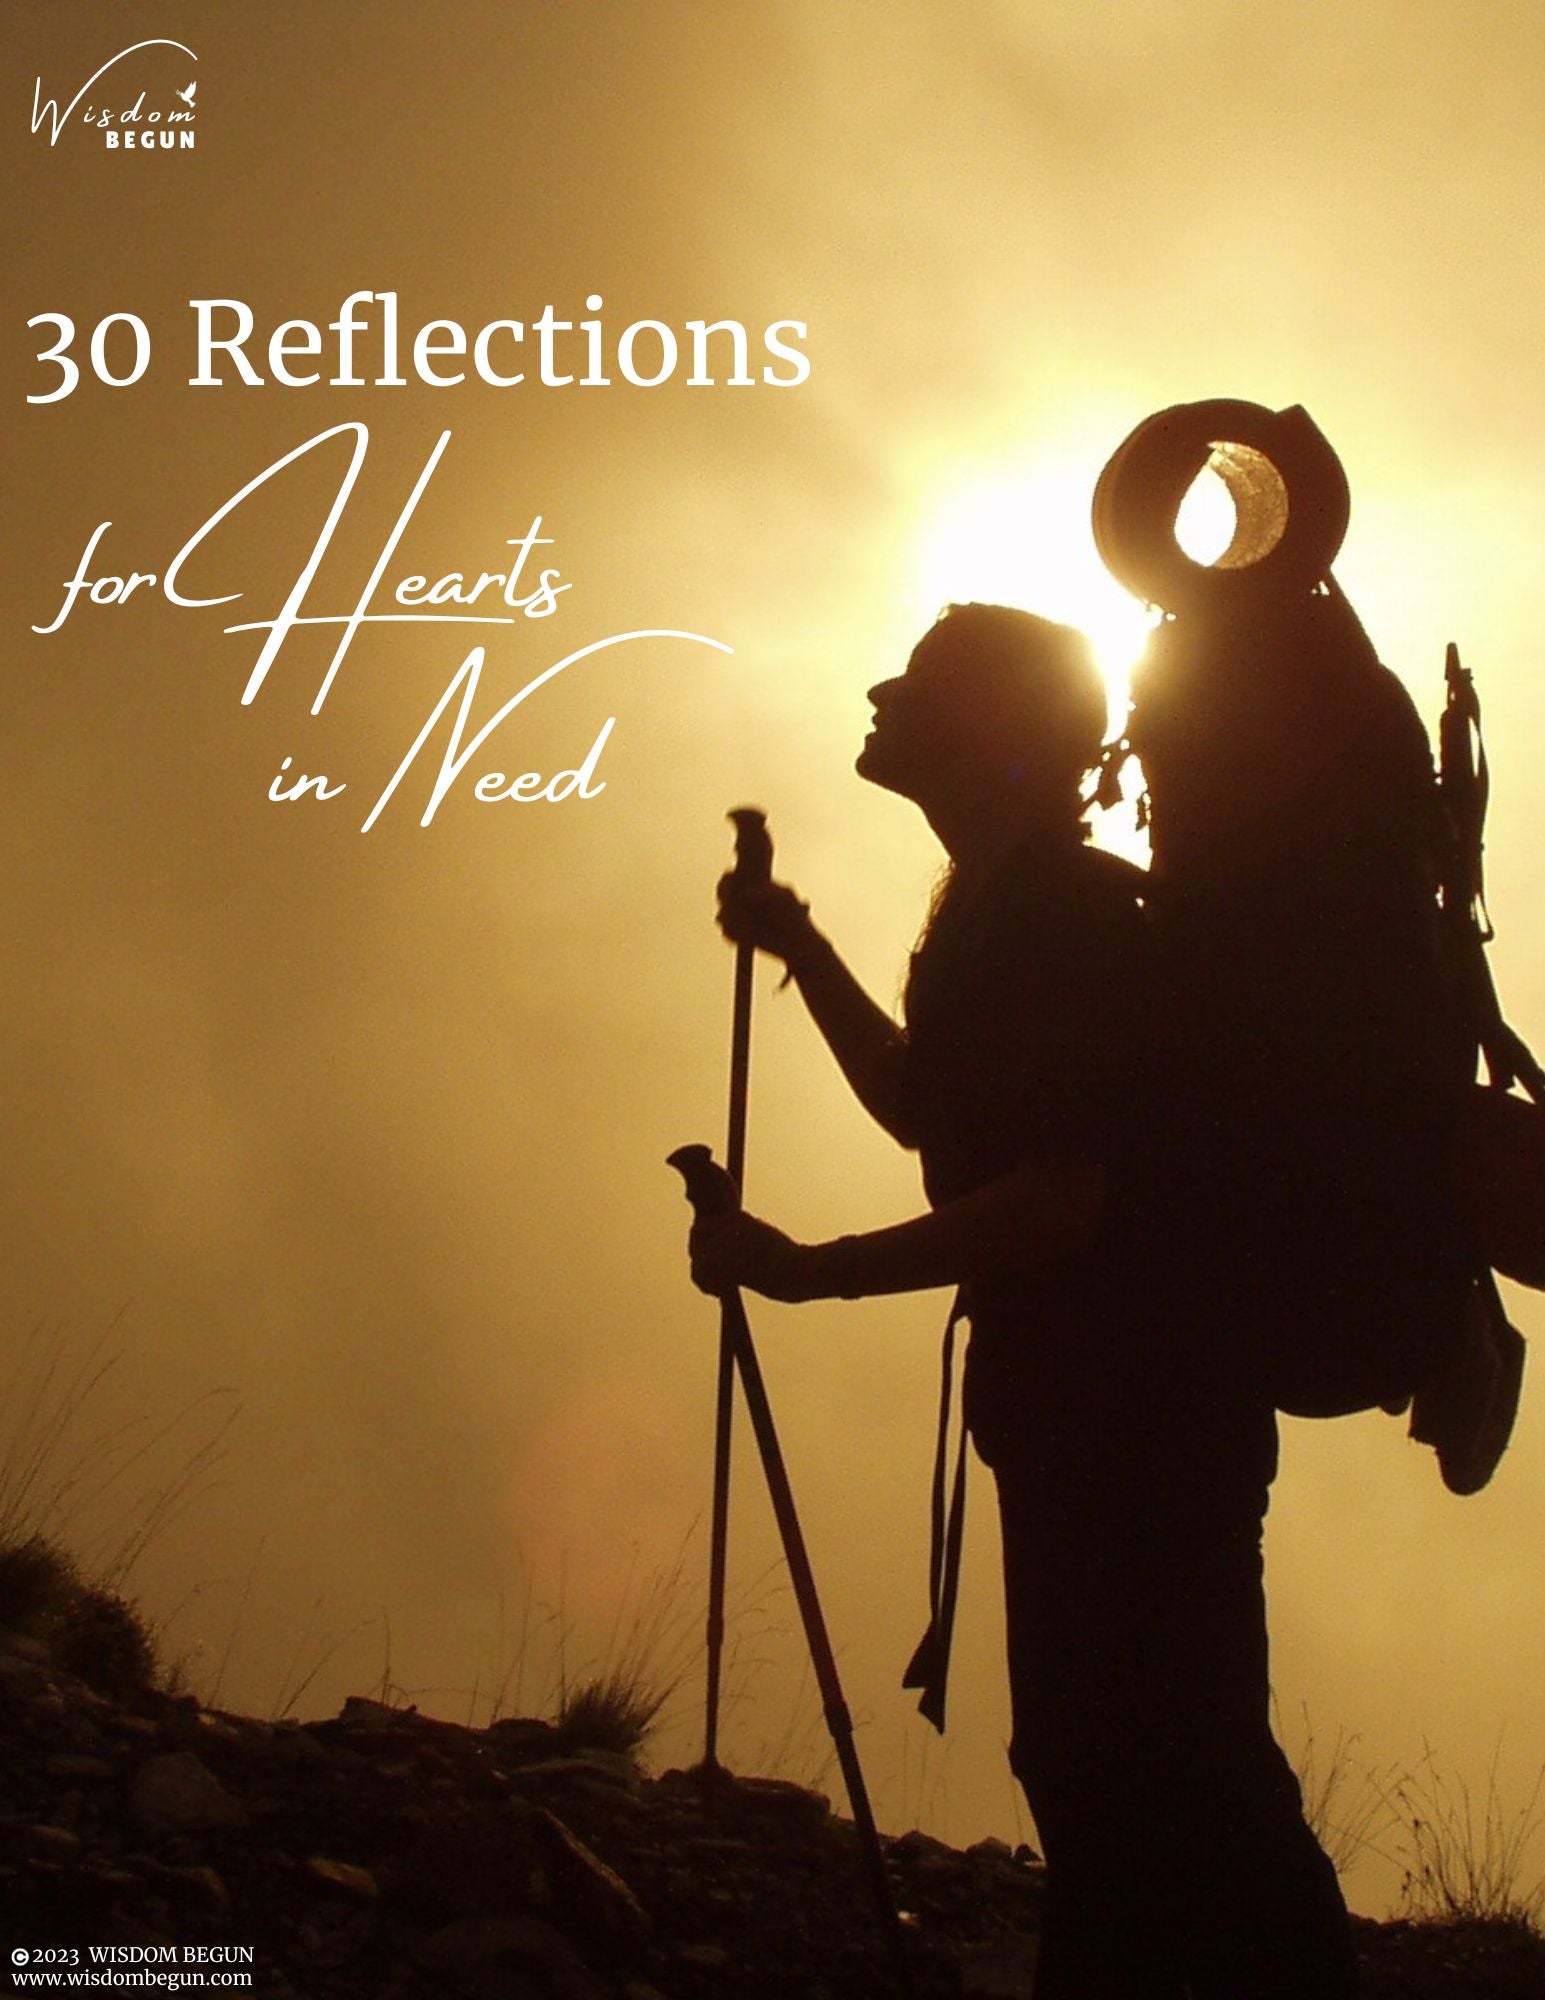 30 Reflections for Hearts in Need